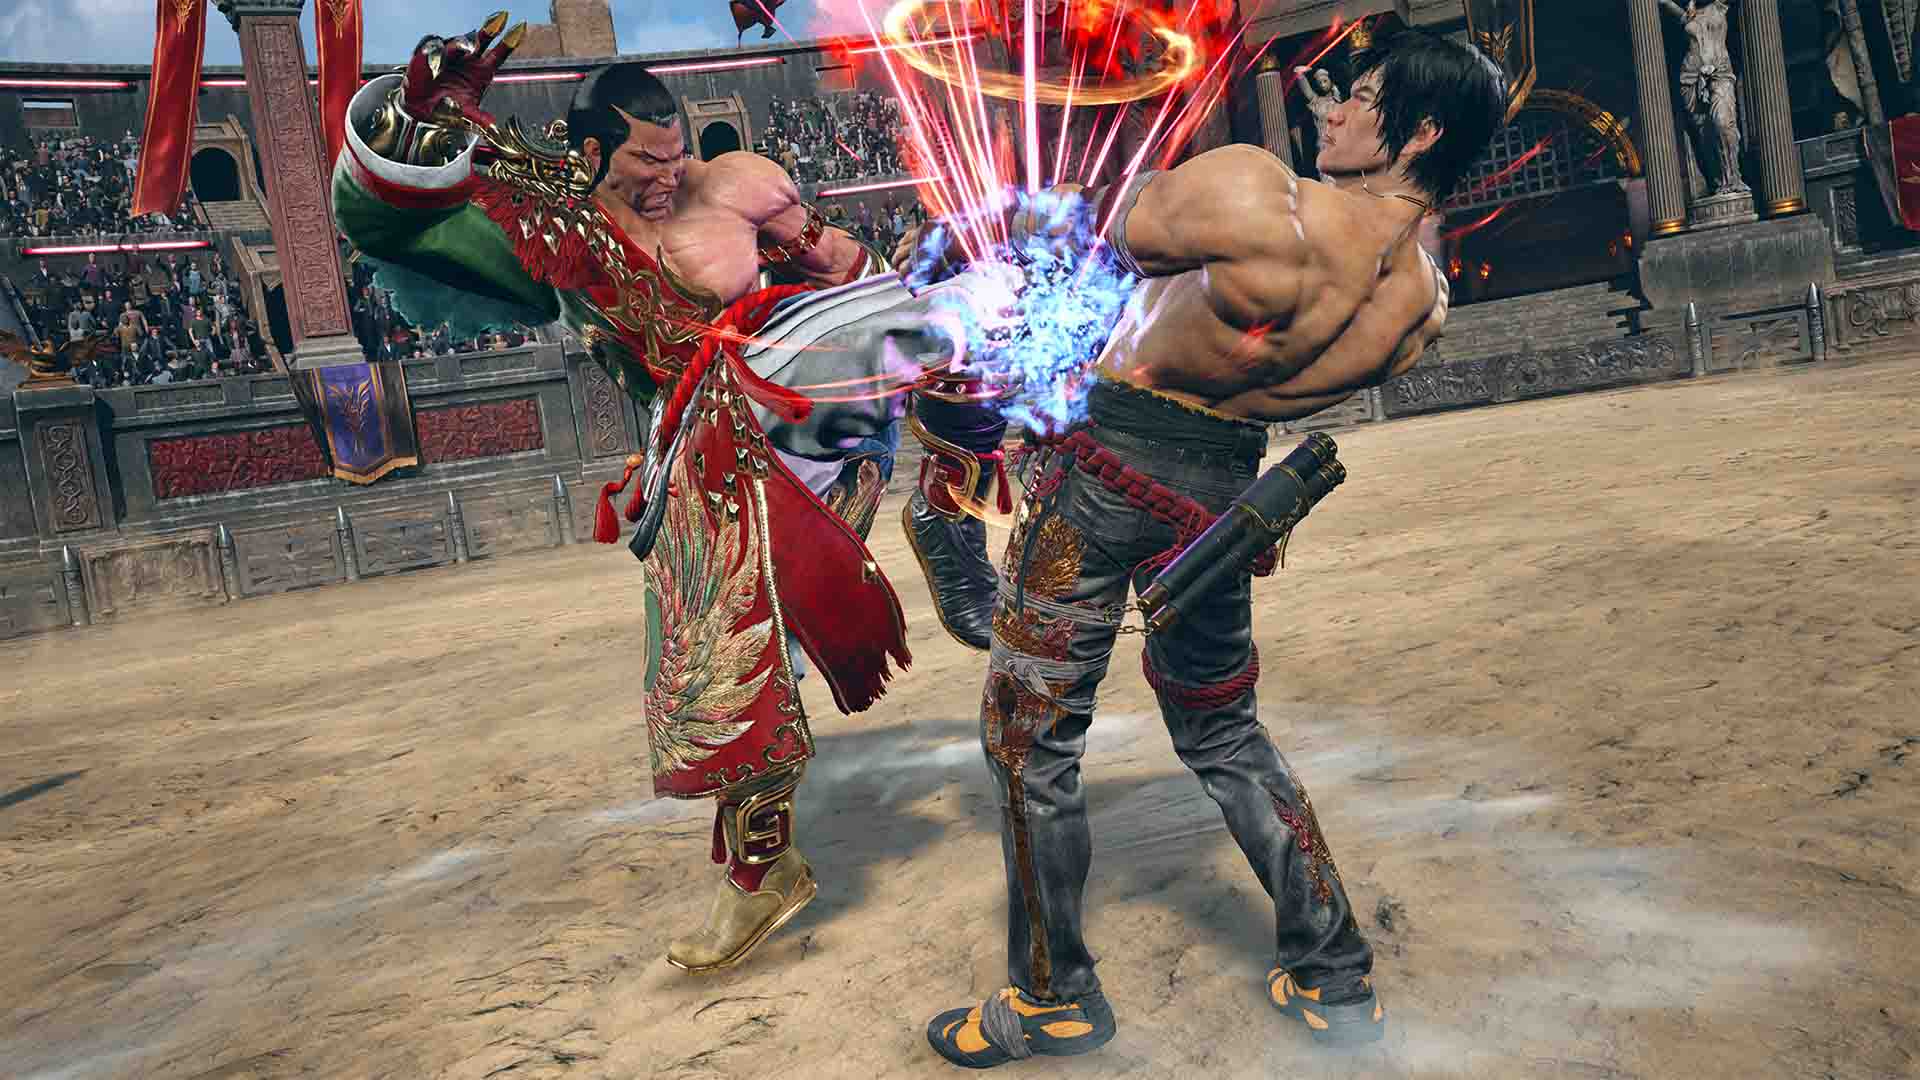 What features are included in the Tekken 8 Demo?